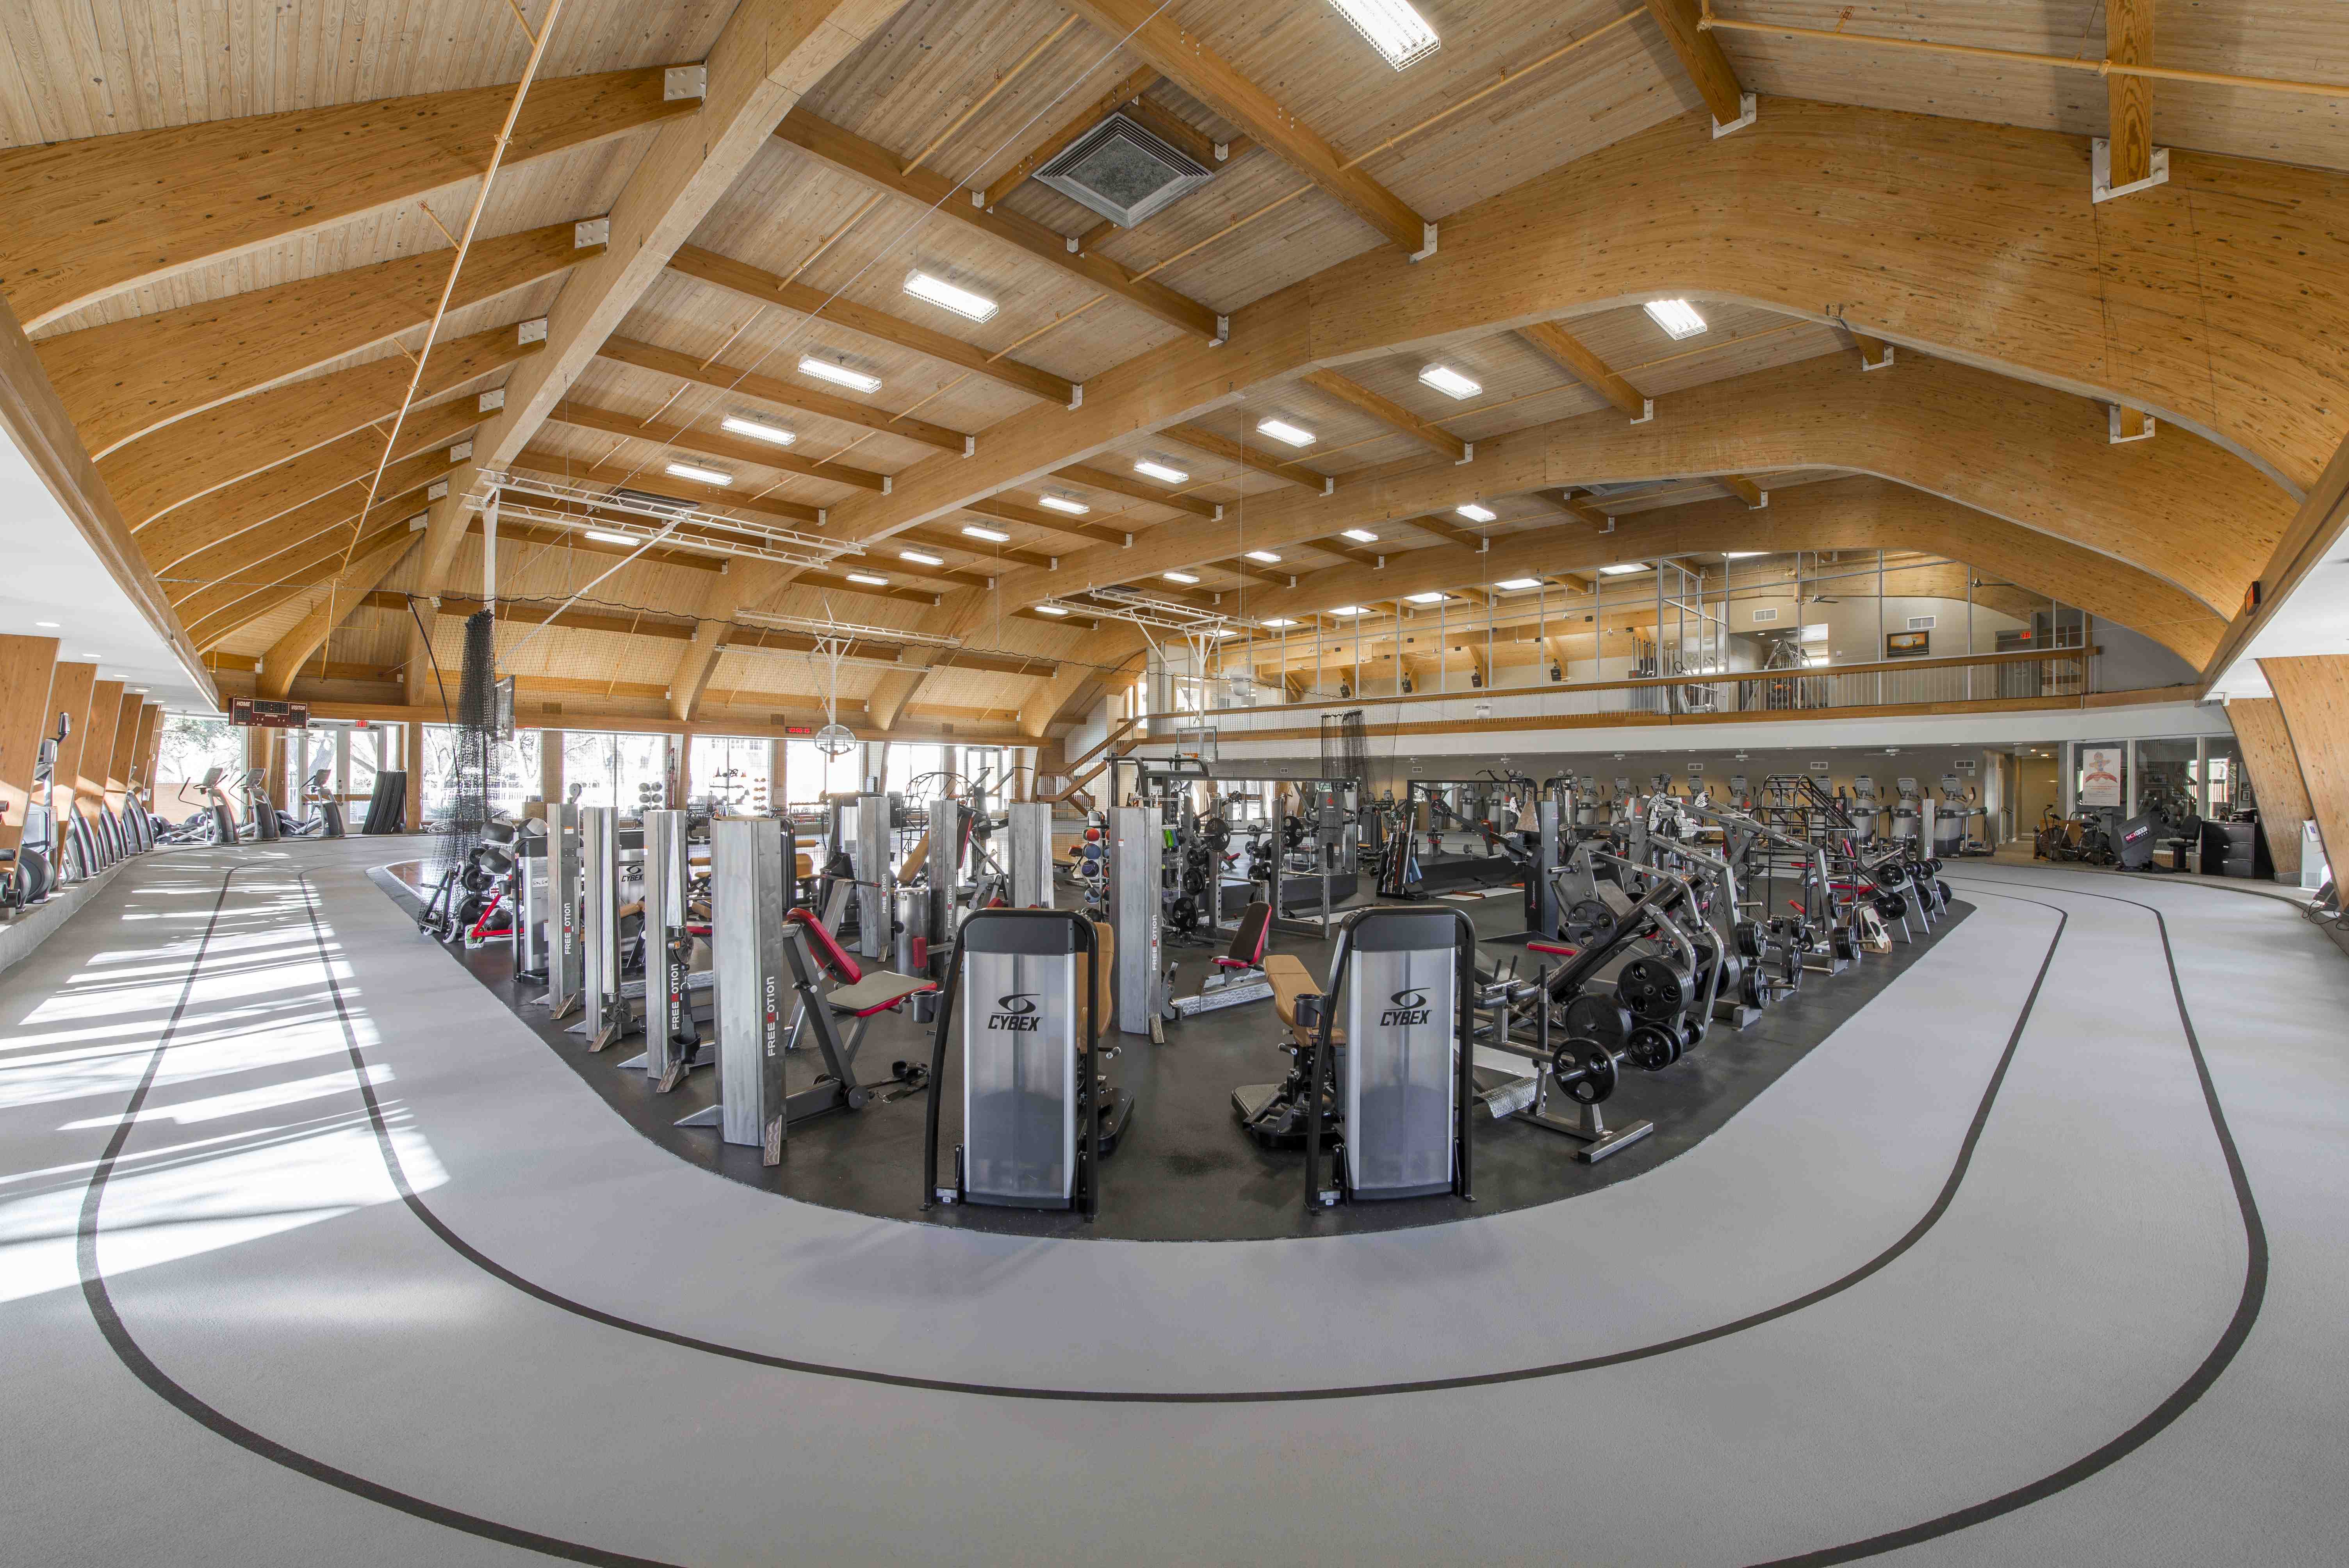 Fitness Center & Gym General Contractor NYC Long Island | Gym Construction